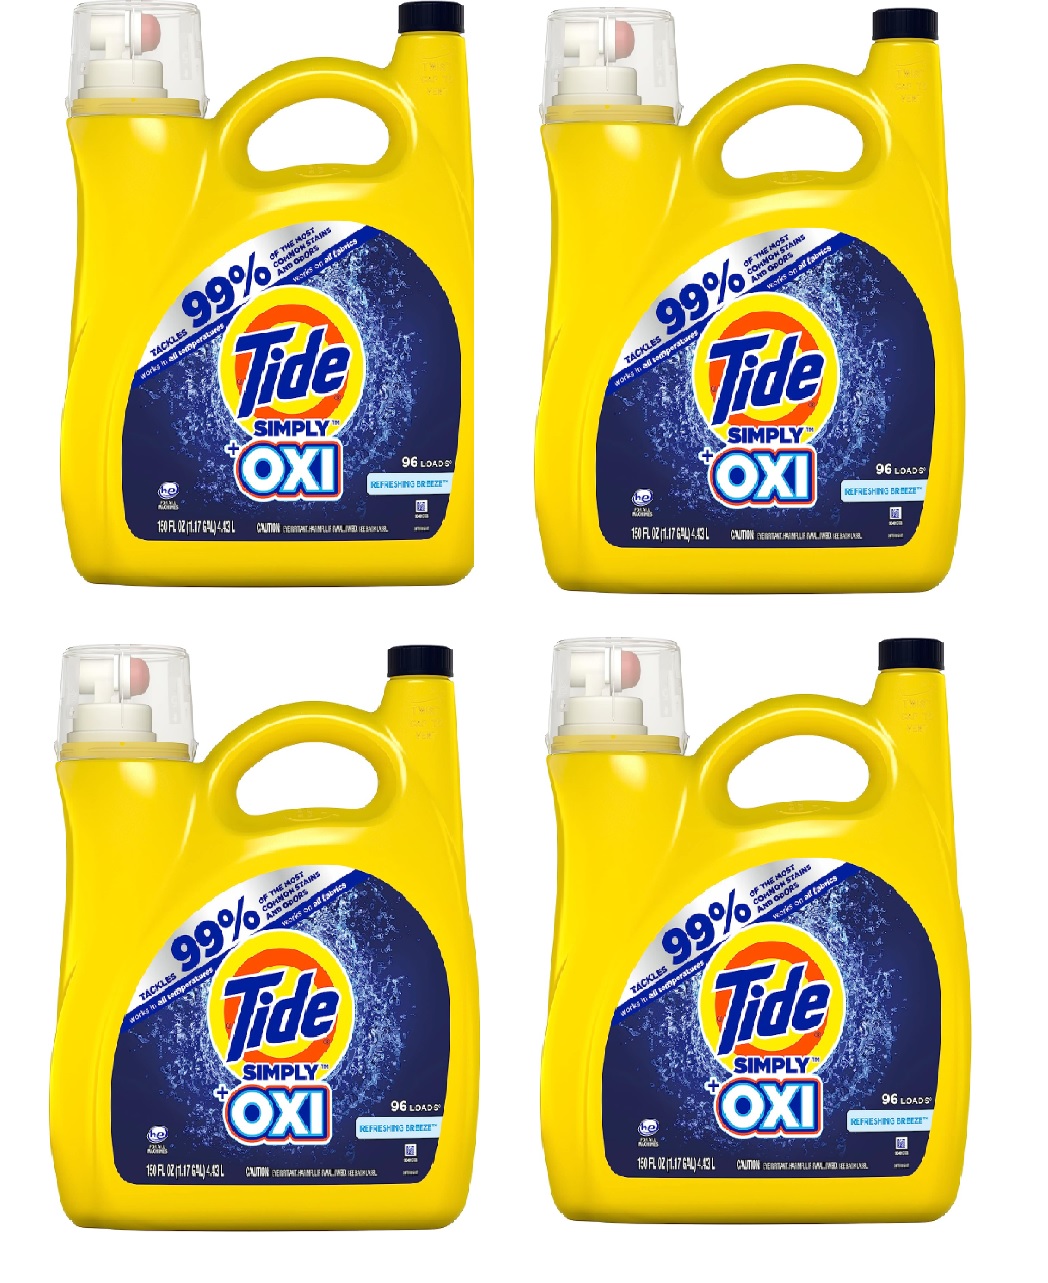 150-fl-oz Tide Simply + Oxi Liquid Laundry Detergent (Clean Breeze) 4 for $33.40 ($8.35 each) w/ S&S + Free Shipping